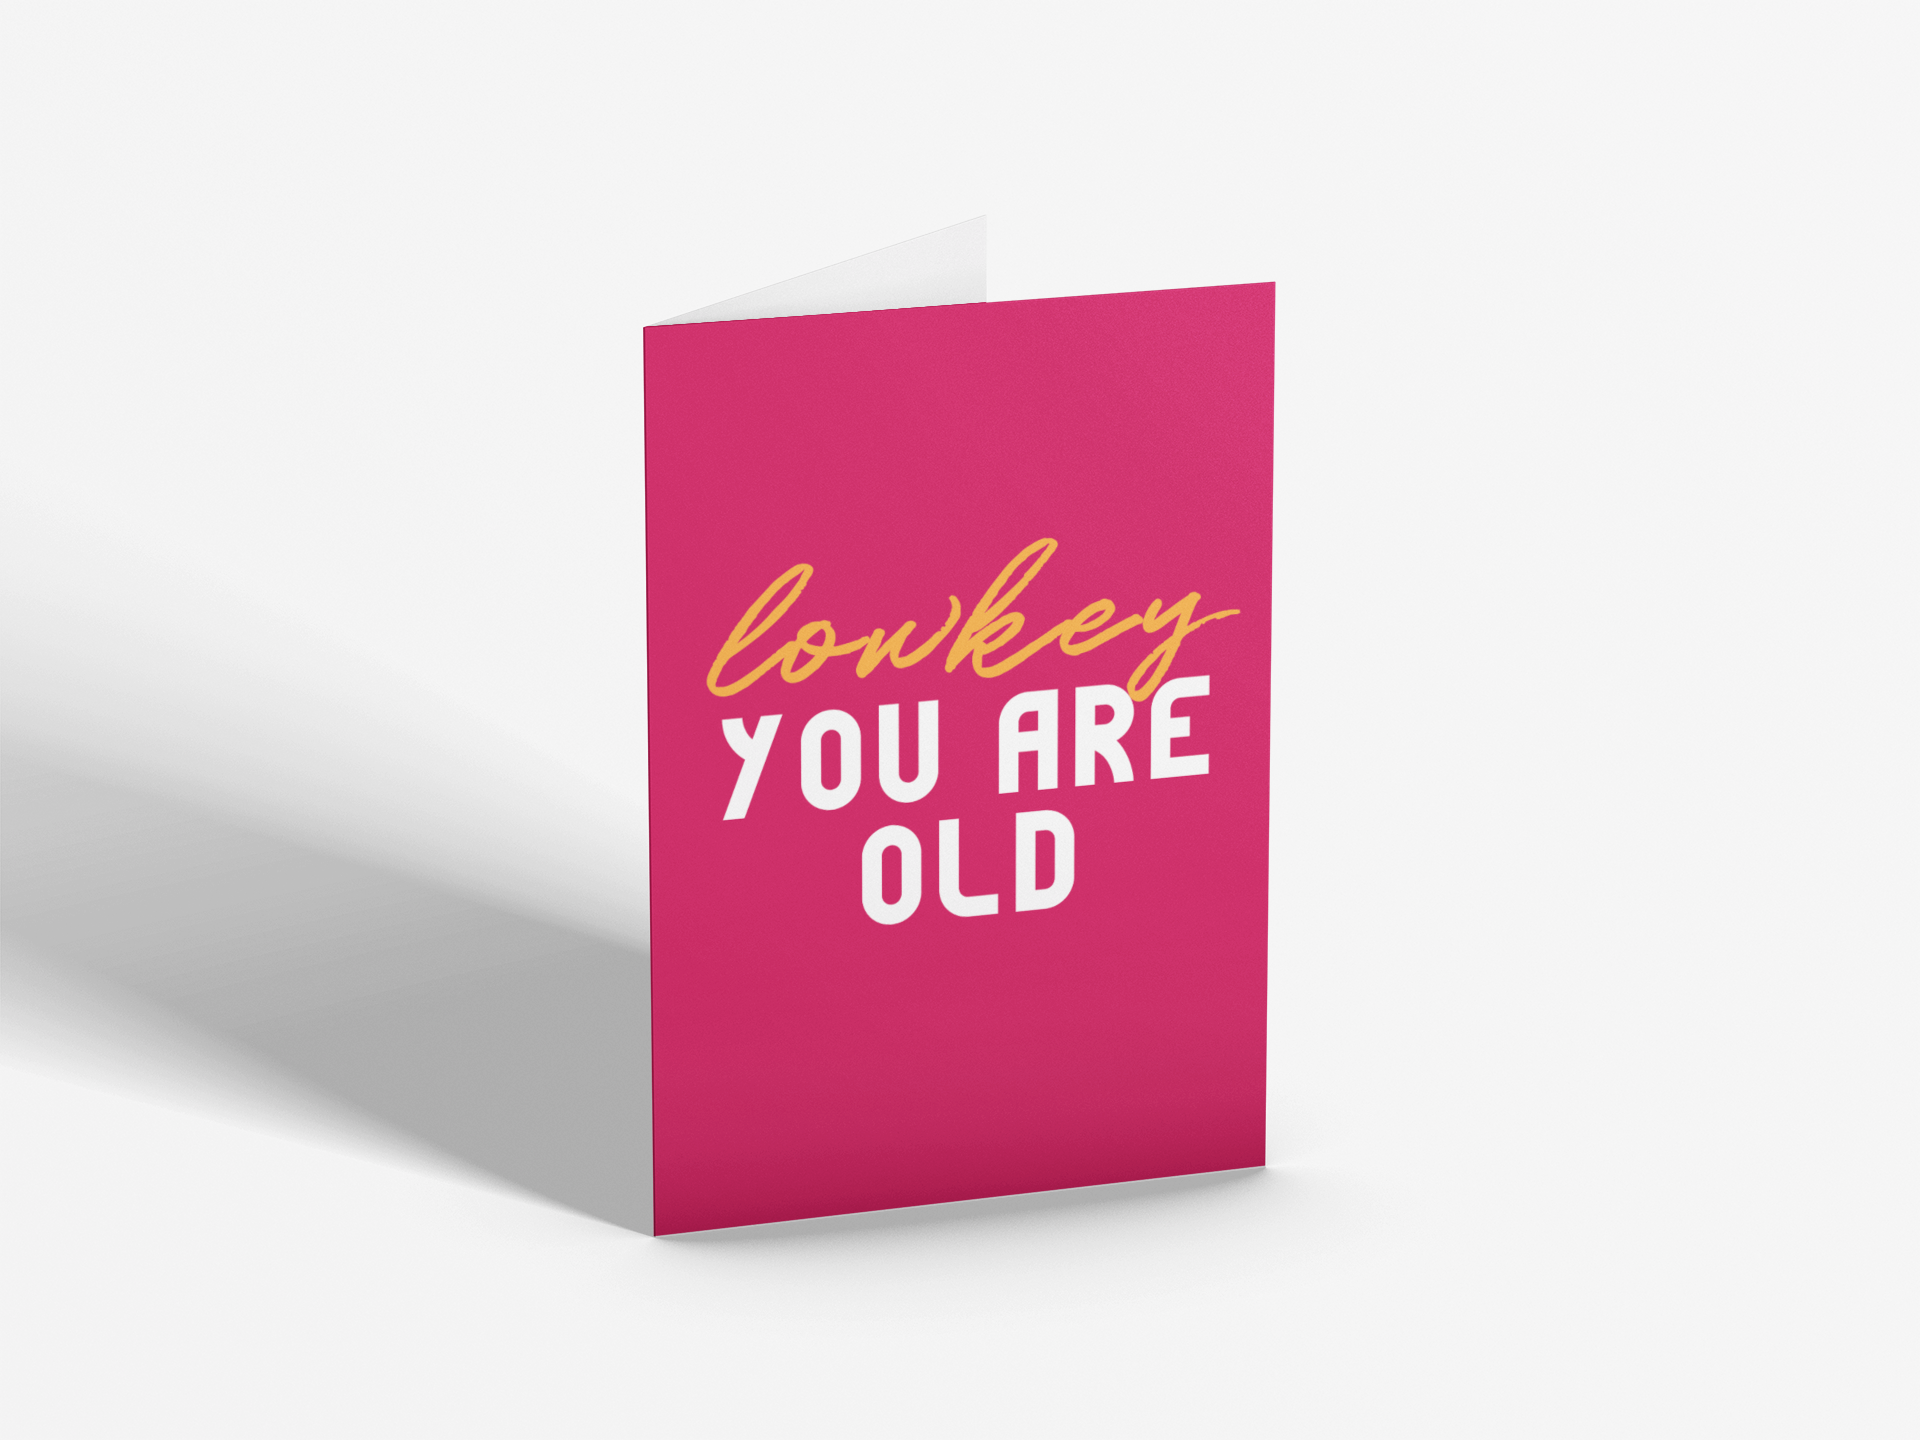 Lowkey, You Are Old | Birthday Card